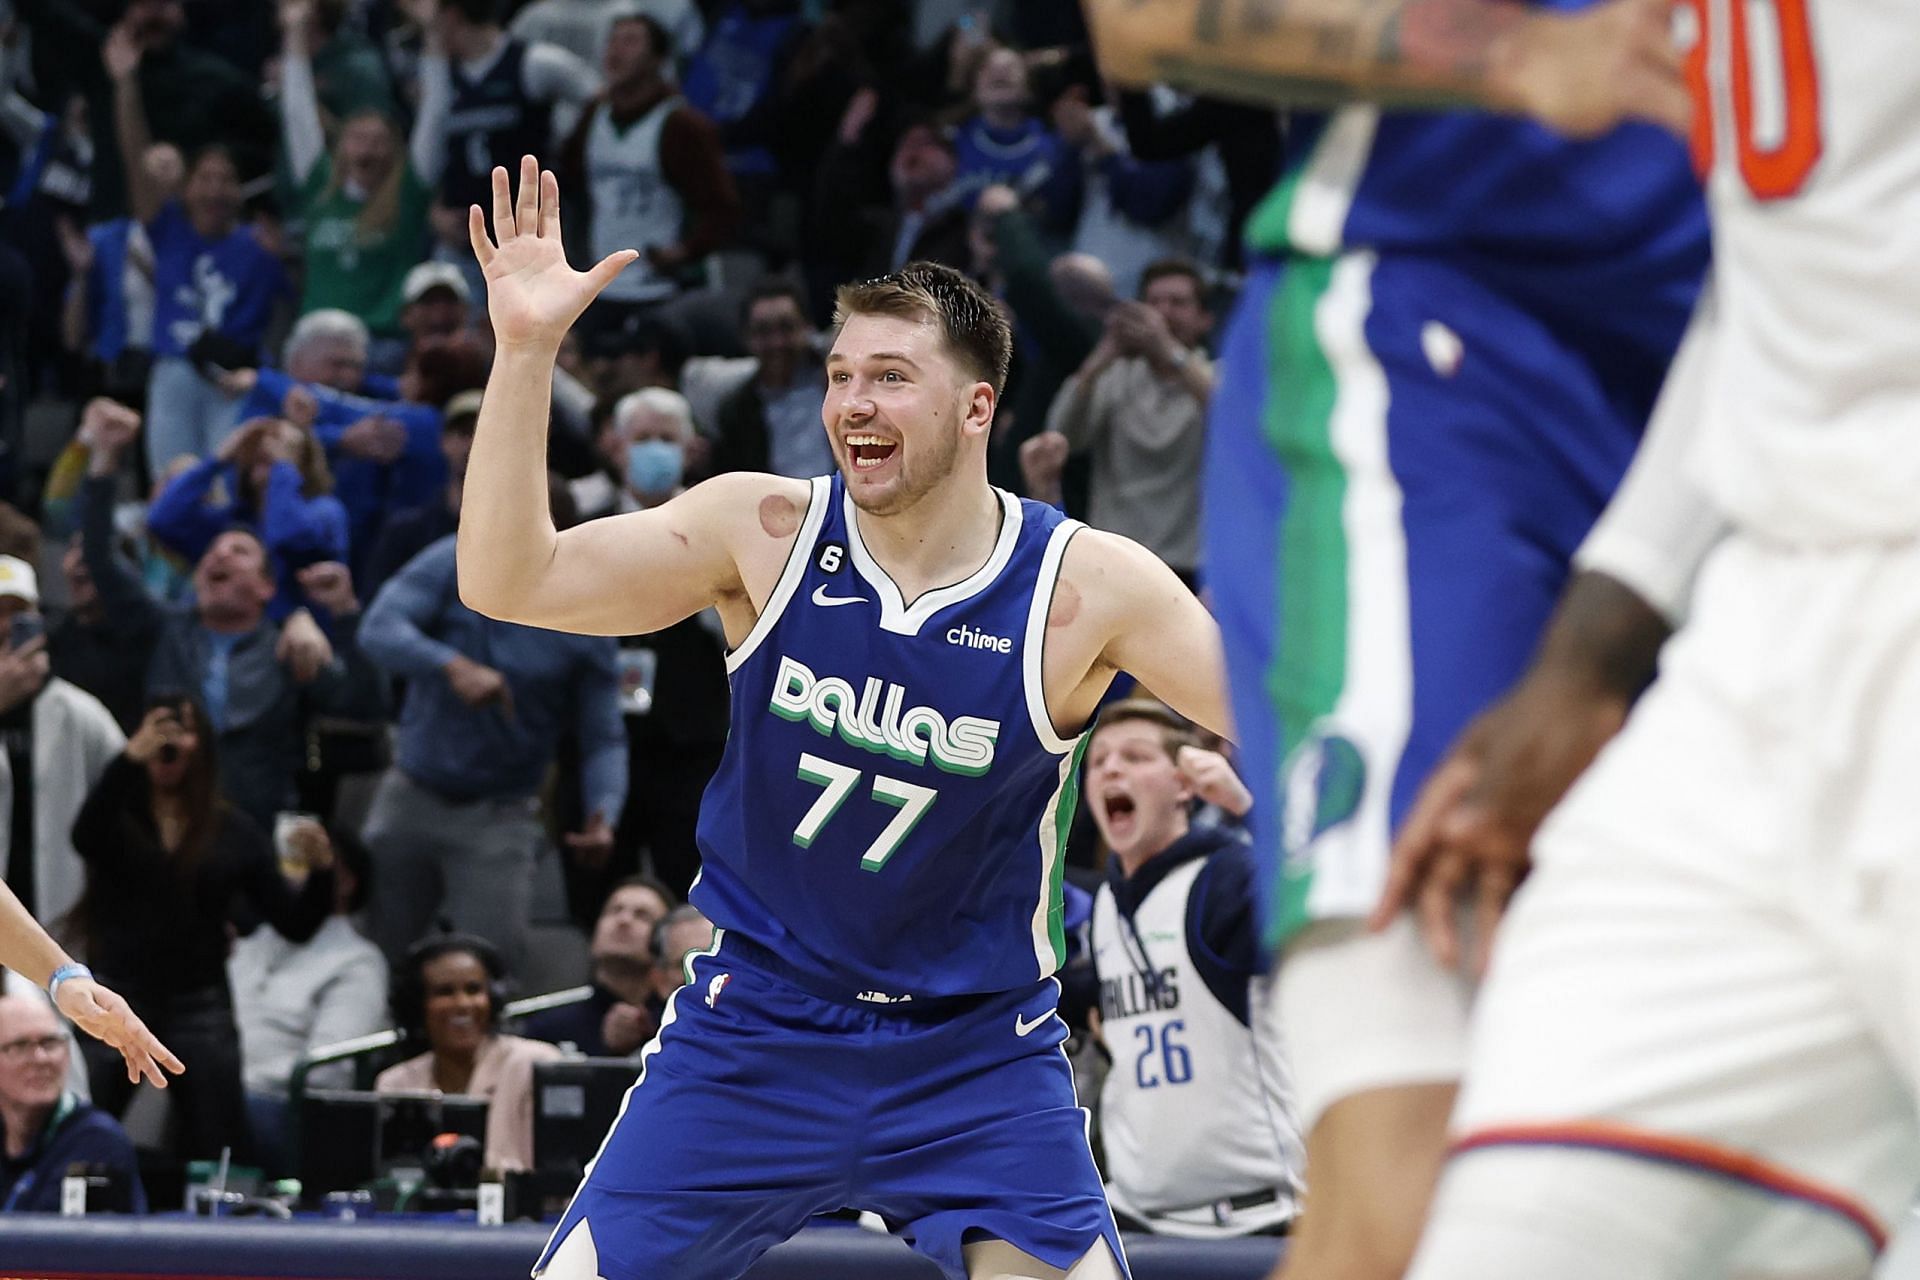 NBA News Today Luka Doncic resets record books with 60-point triple-double, Erik Spoelstra lauds LeBron James longevity, and more